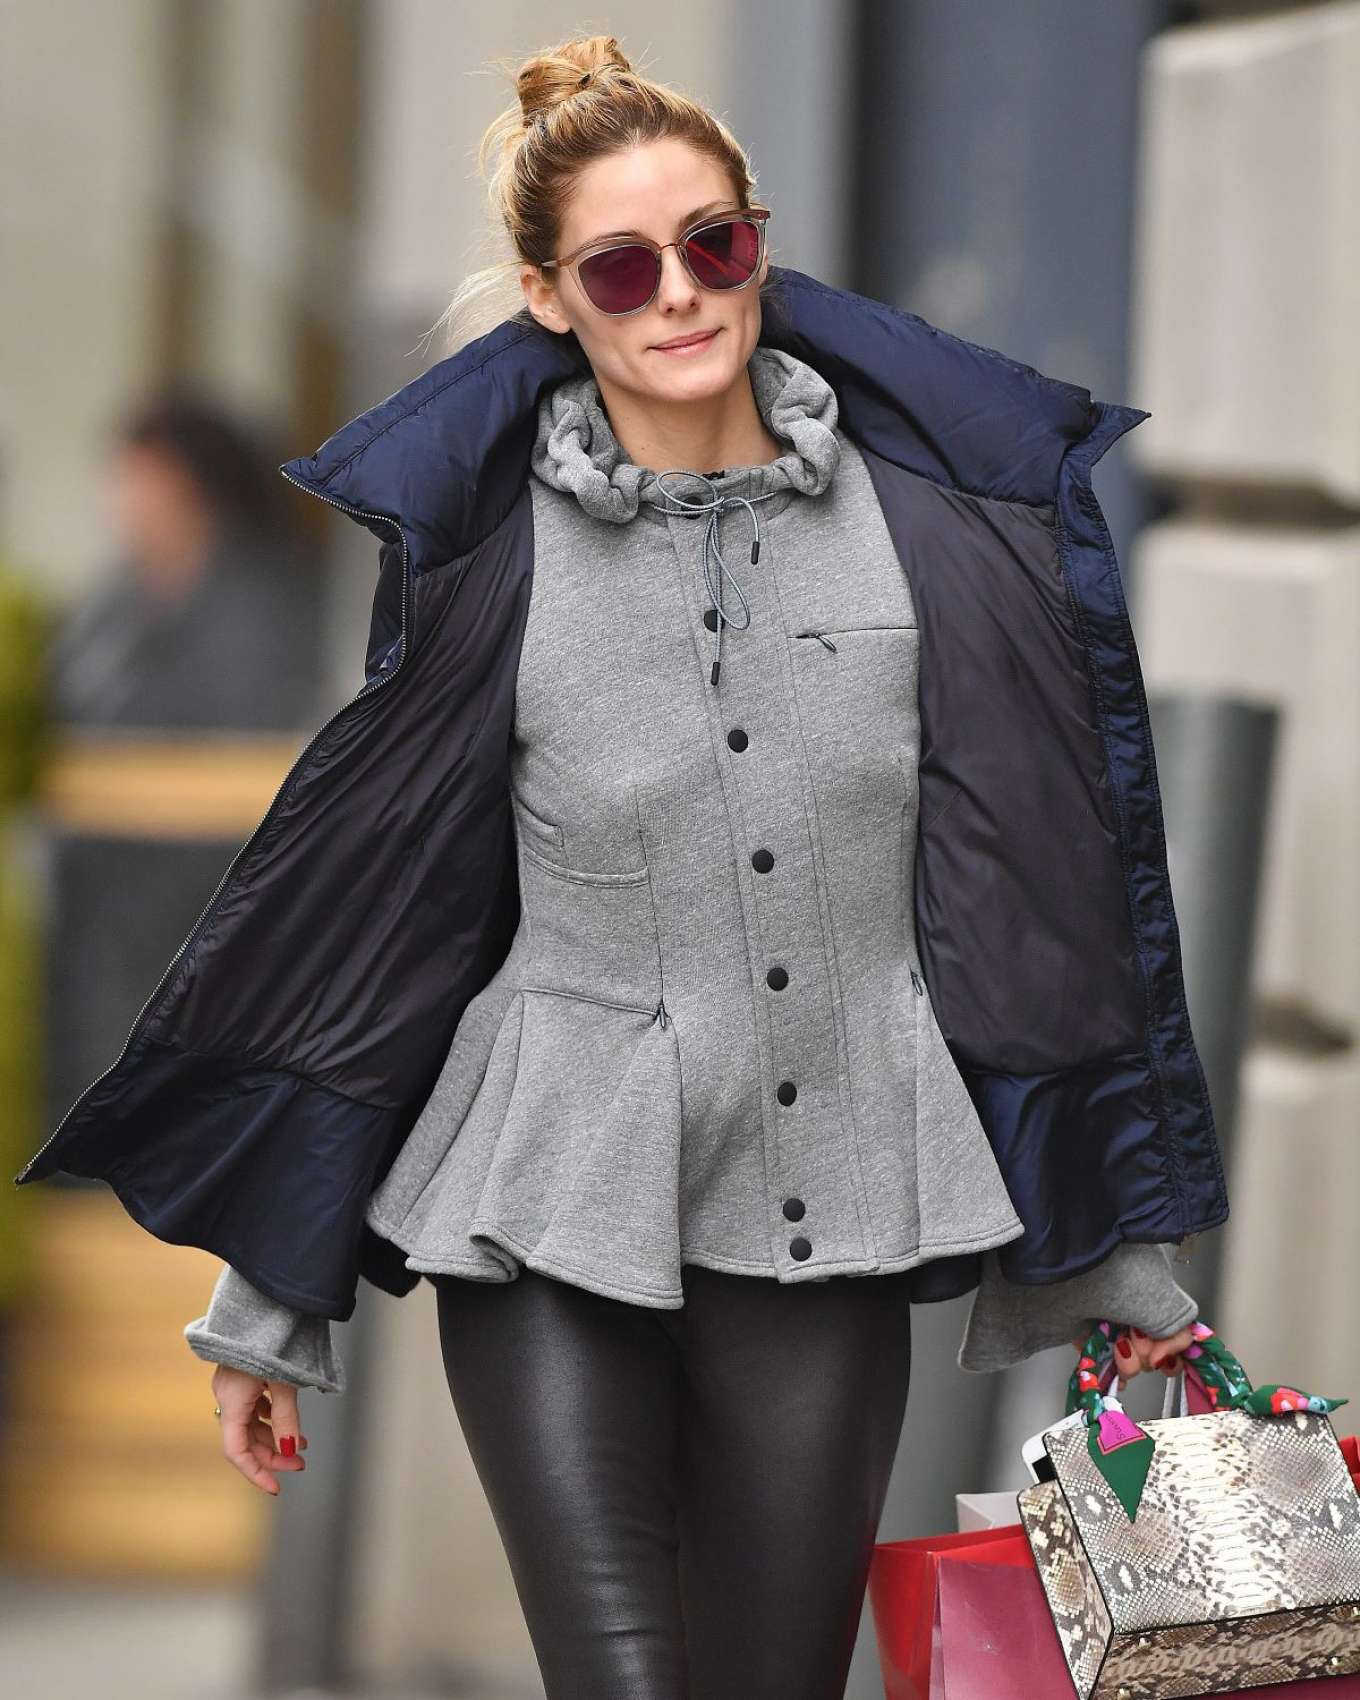 Olivia Palermo out in New York